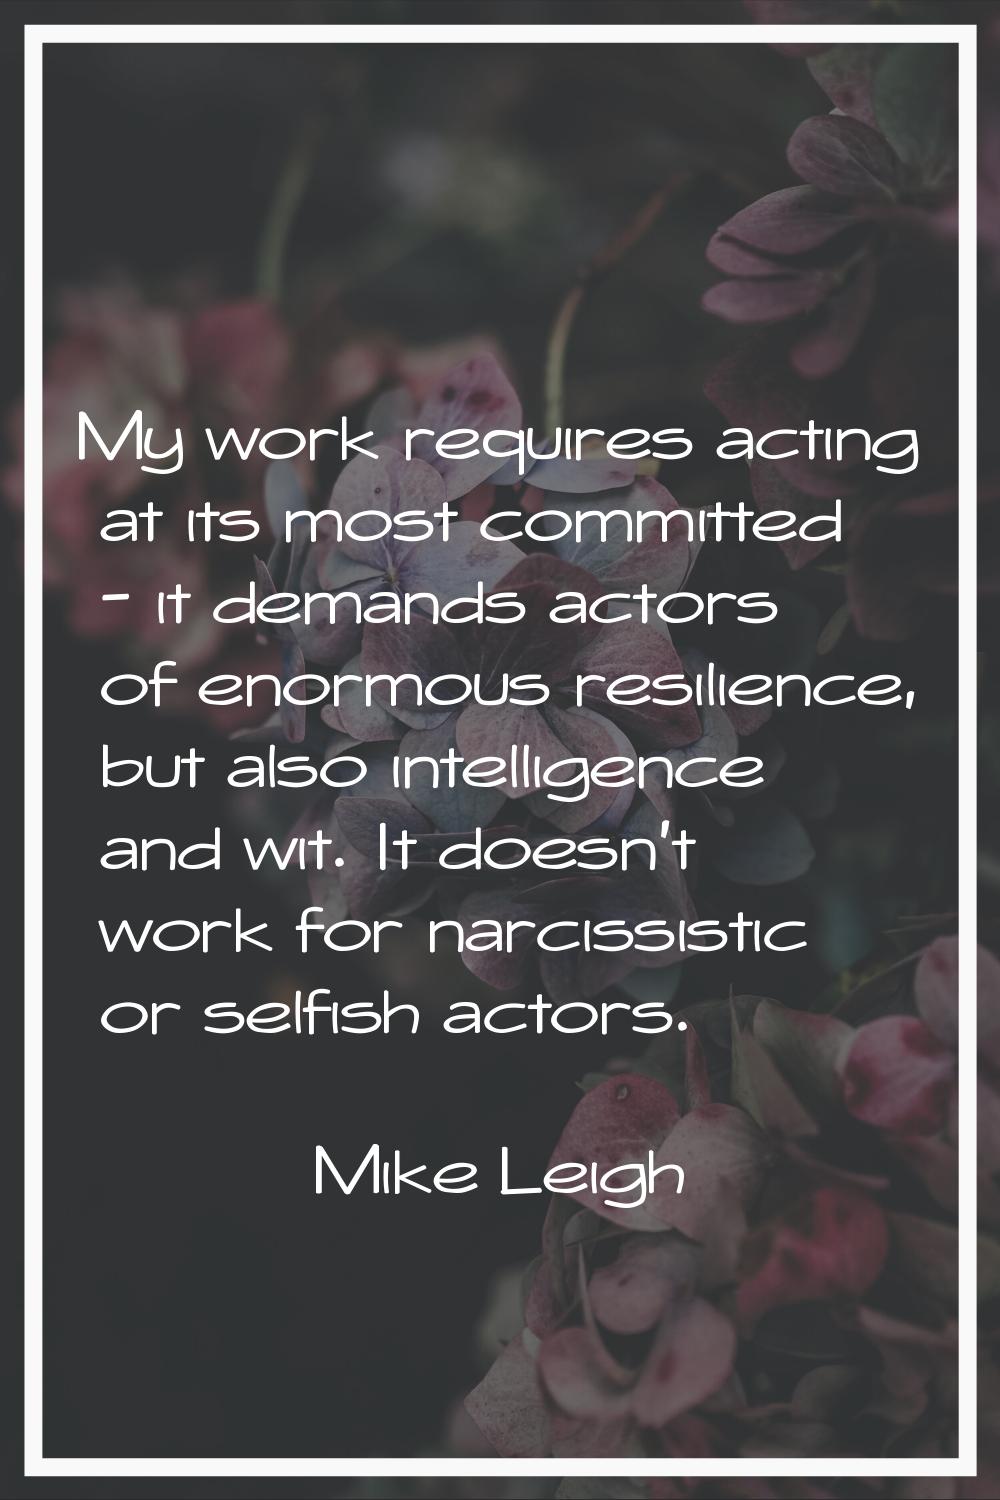 My work requires acting at its most committed - it demands actors of enormous resilience, but also 